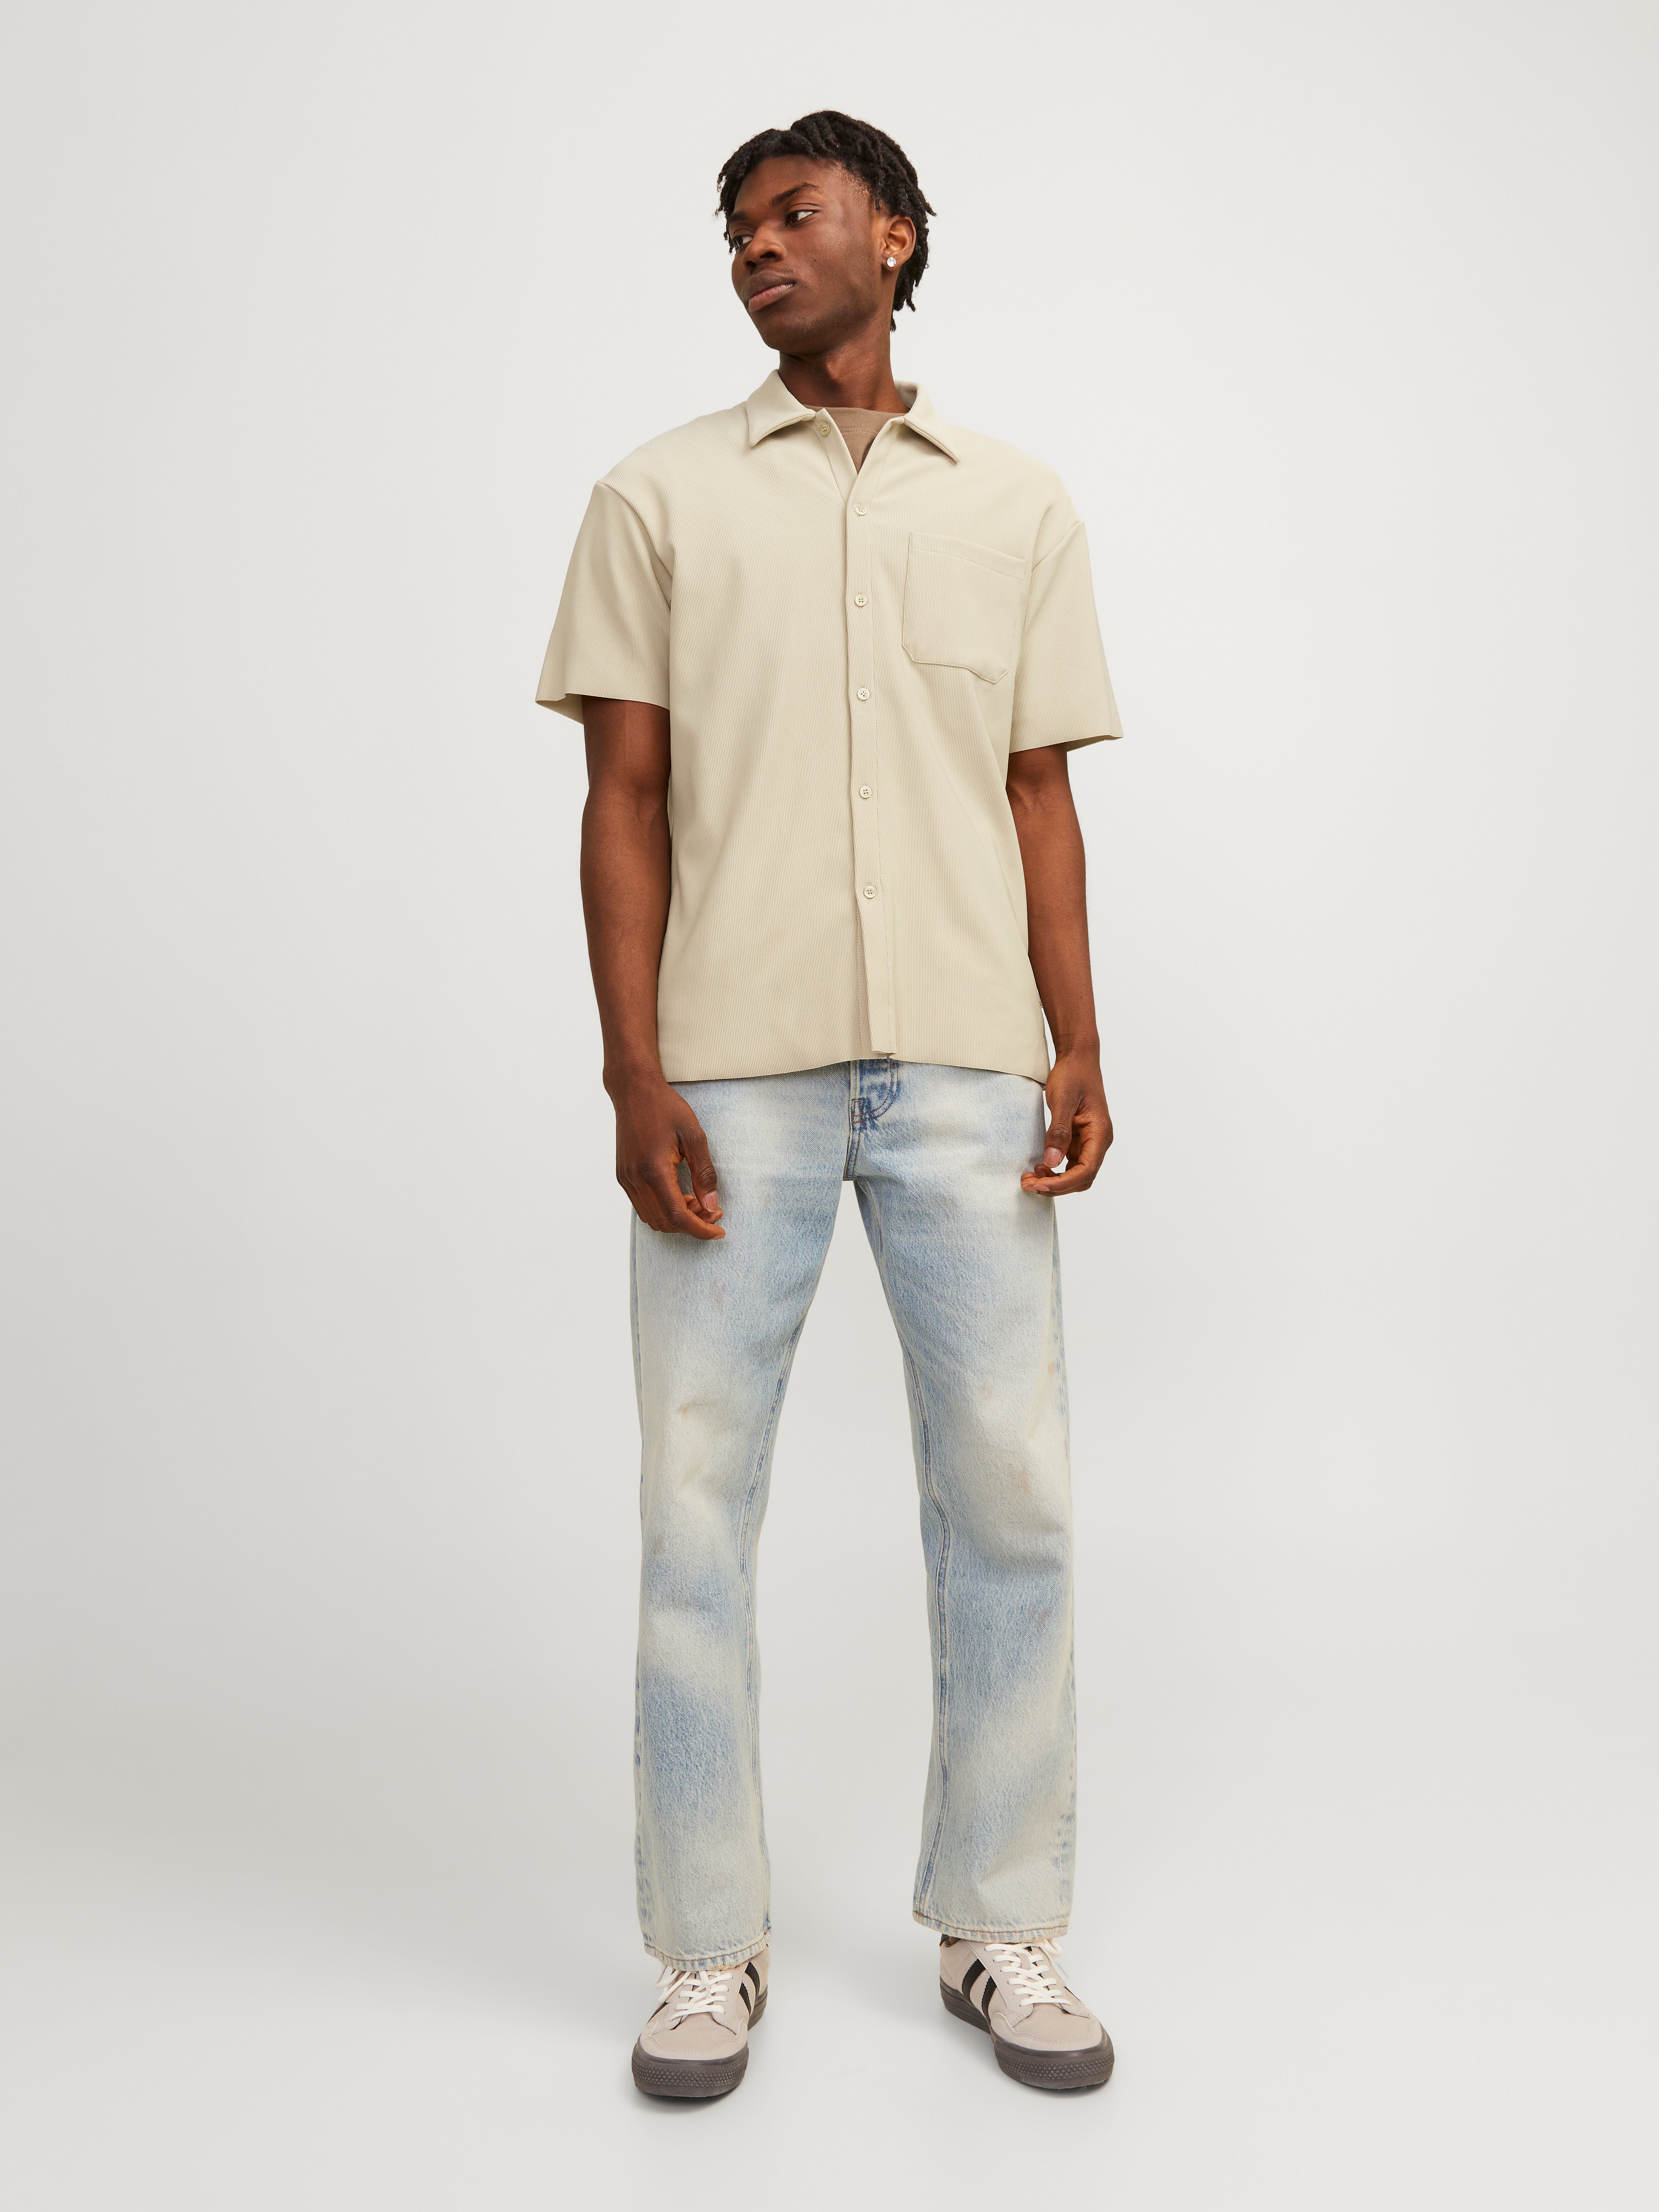 Relaxed Fit Resort shirt